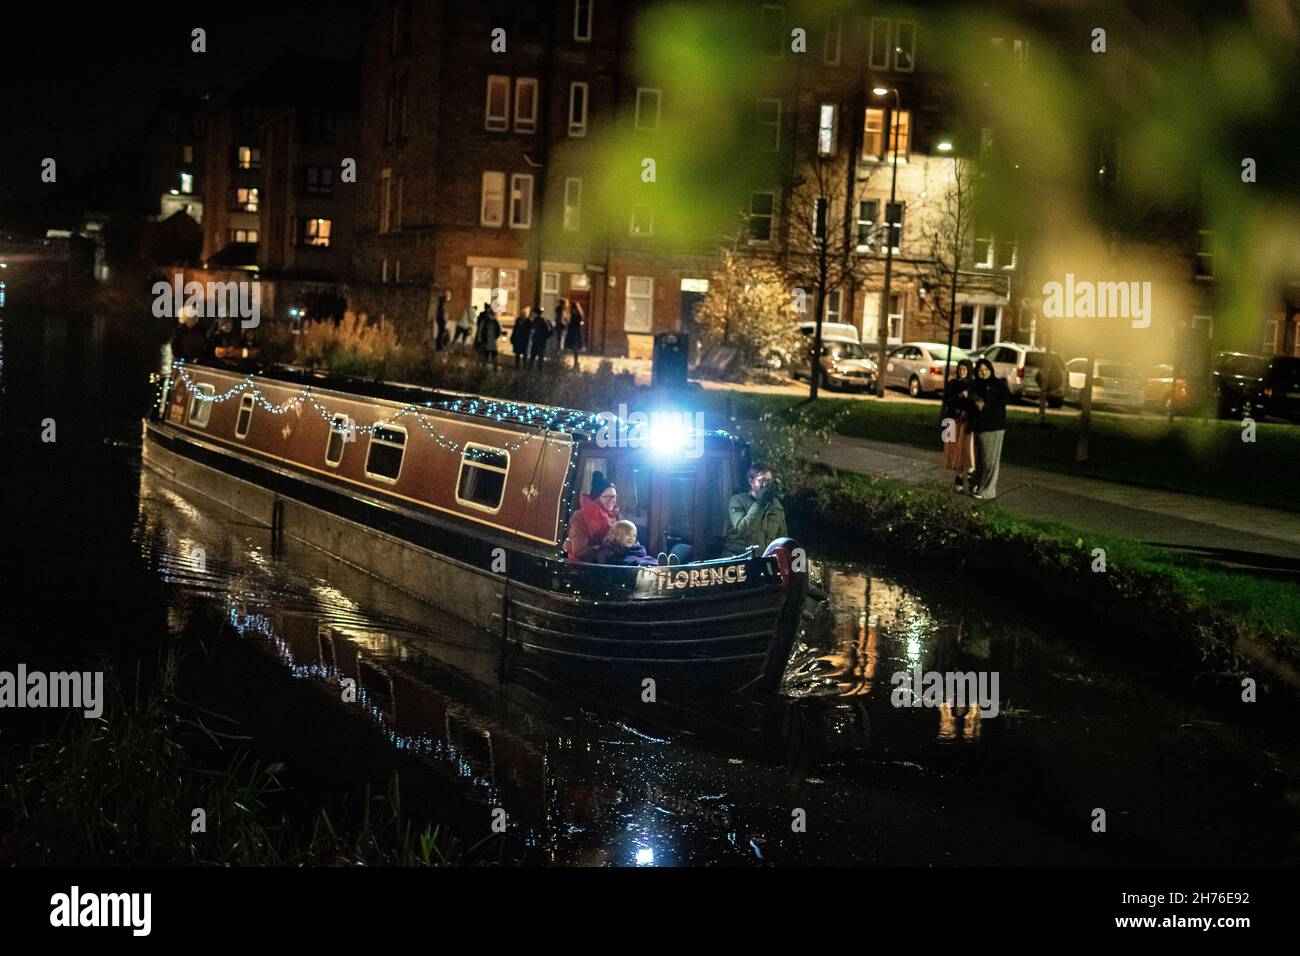 Edinburgh, Scotland, 21tst November, 2021. Flotilla of light, canal light parade. hundreds turn out for edinburgh canals light parade, organised by the Lowland Canals Association. a number of canal boats came from around slateford to lemington lift bridge displaying lights and costumes on their boats while singing and being merry.Credit: Reiss McGuire/Alamy live news. Stock Photo